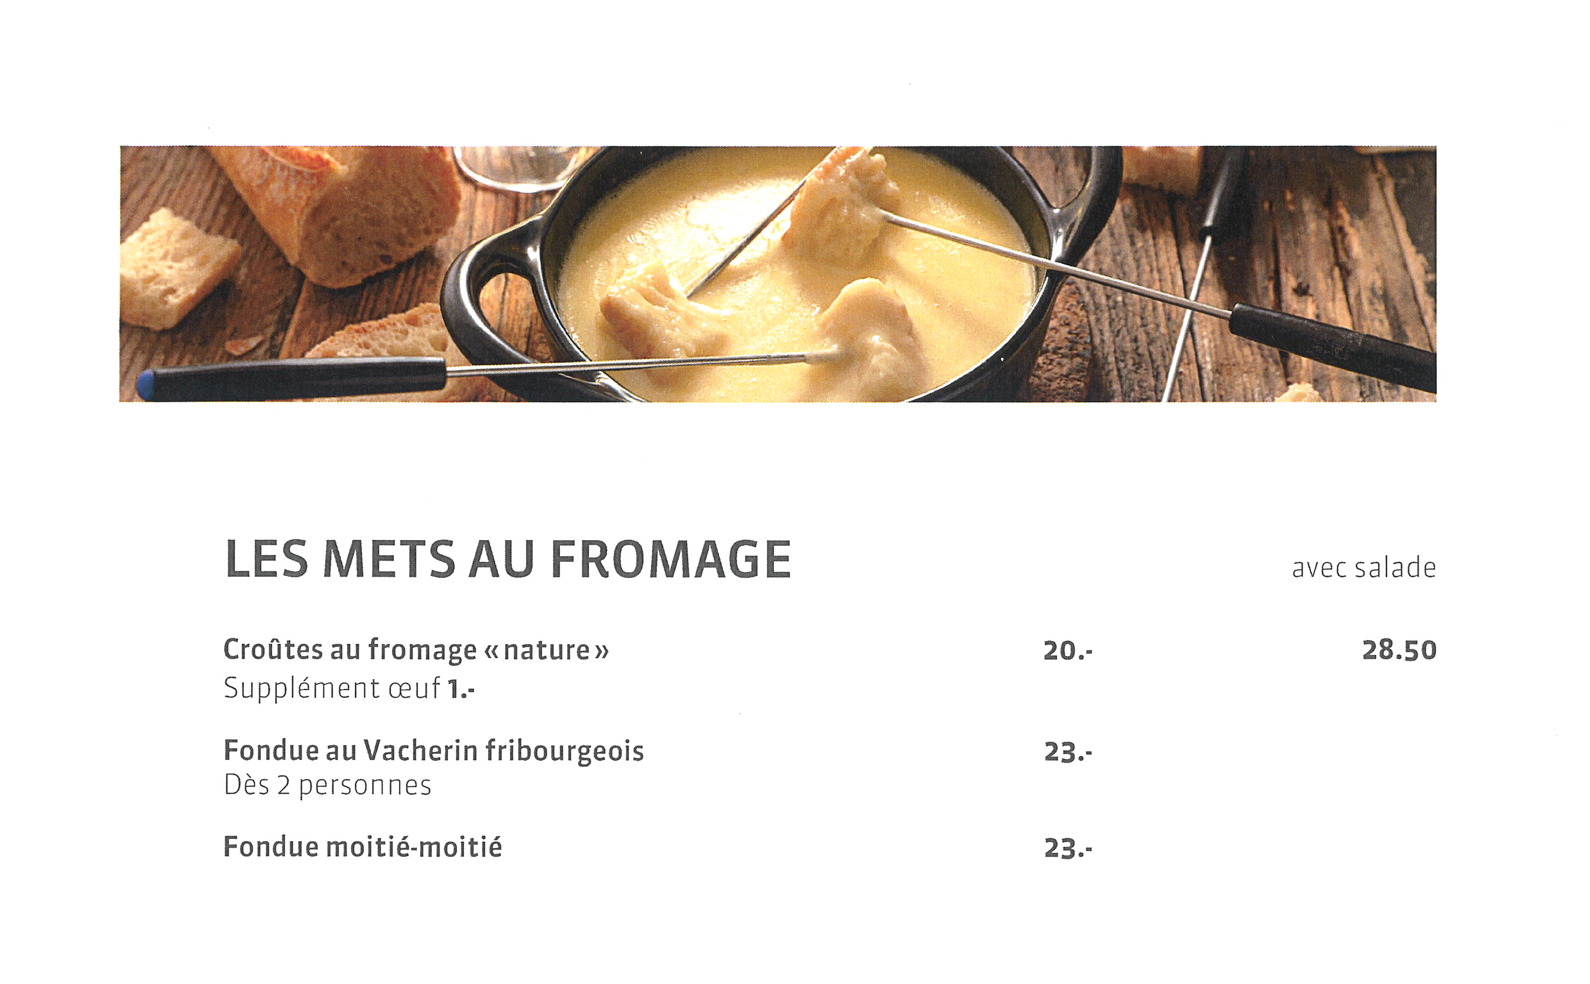 Mets au fromage